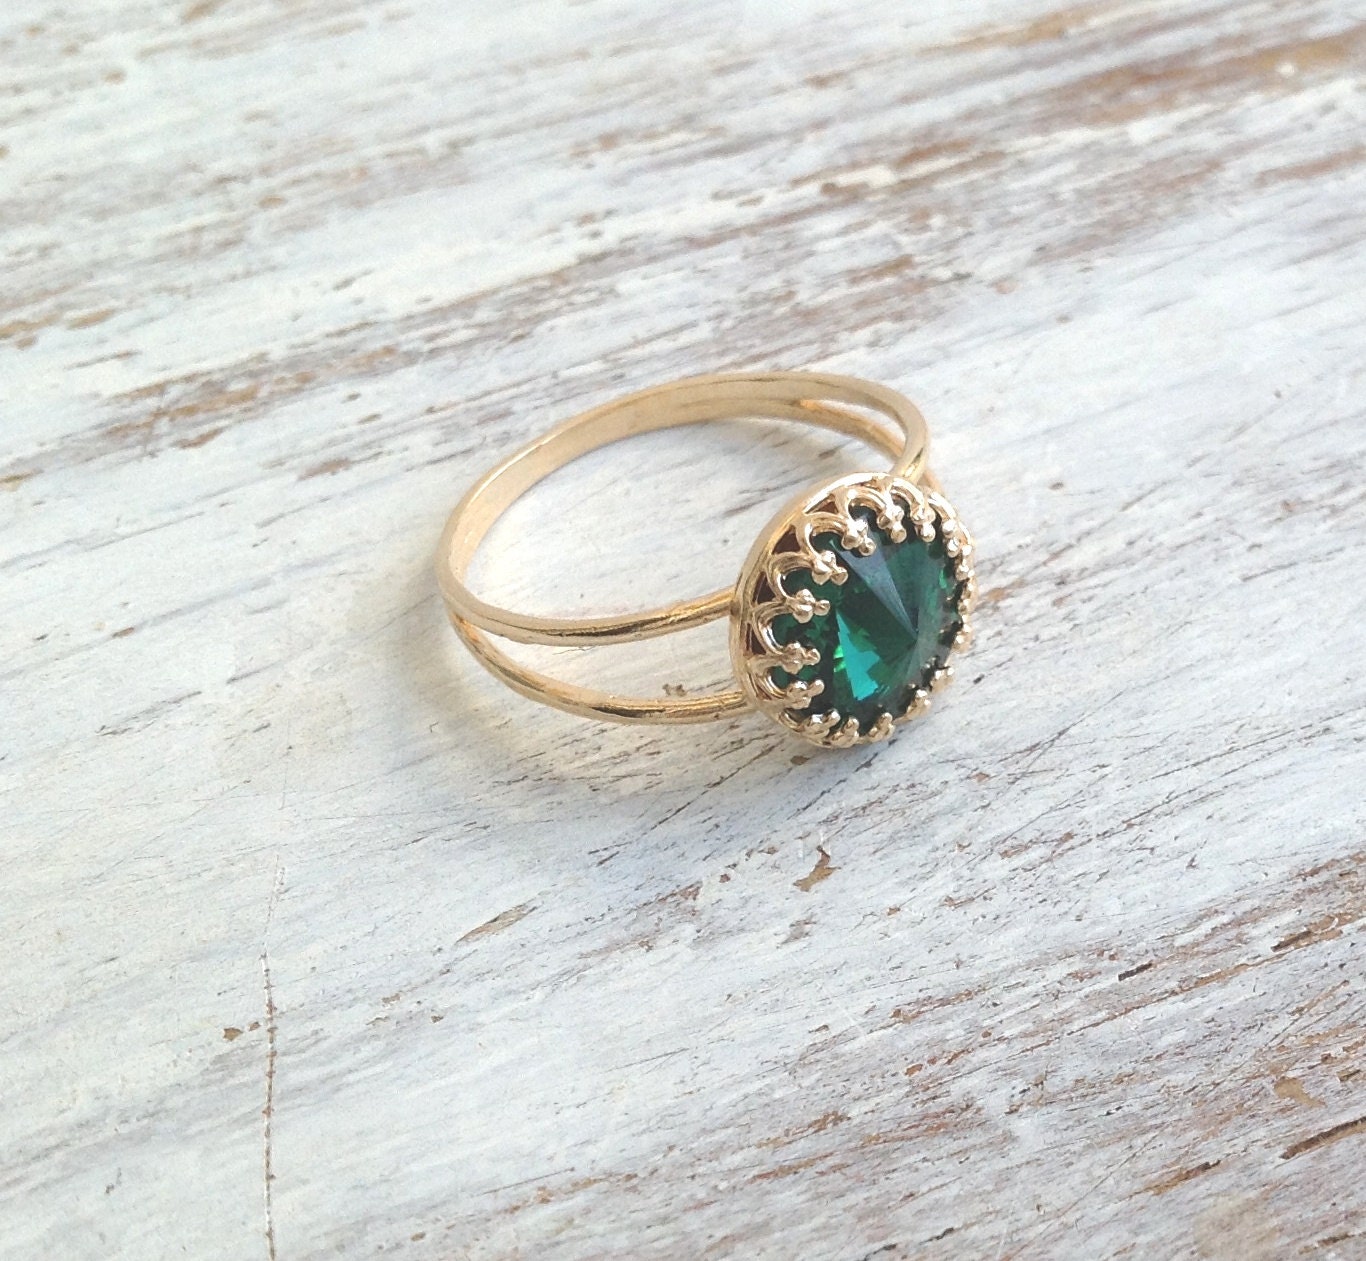 Stacking Ring Gold Filled Ring Emerald Ring Green Jewelry | Etsy